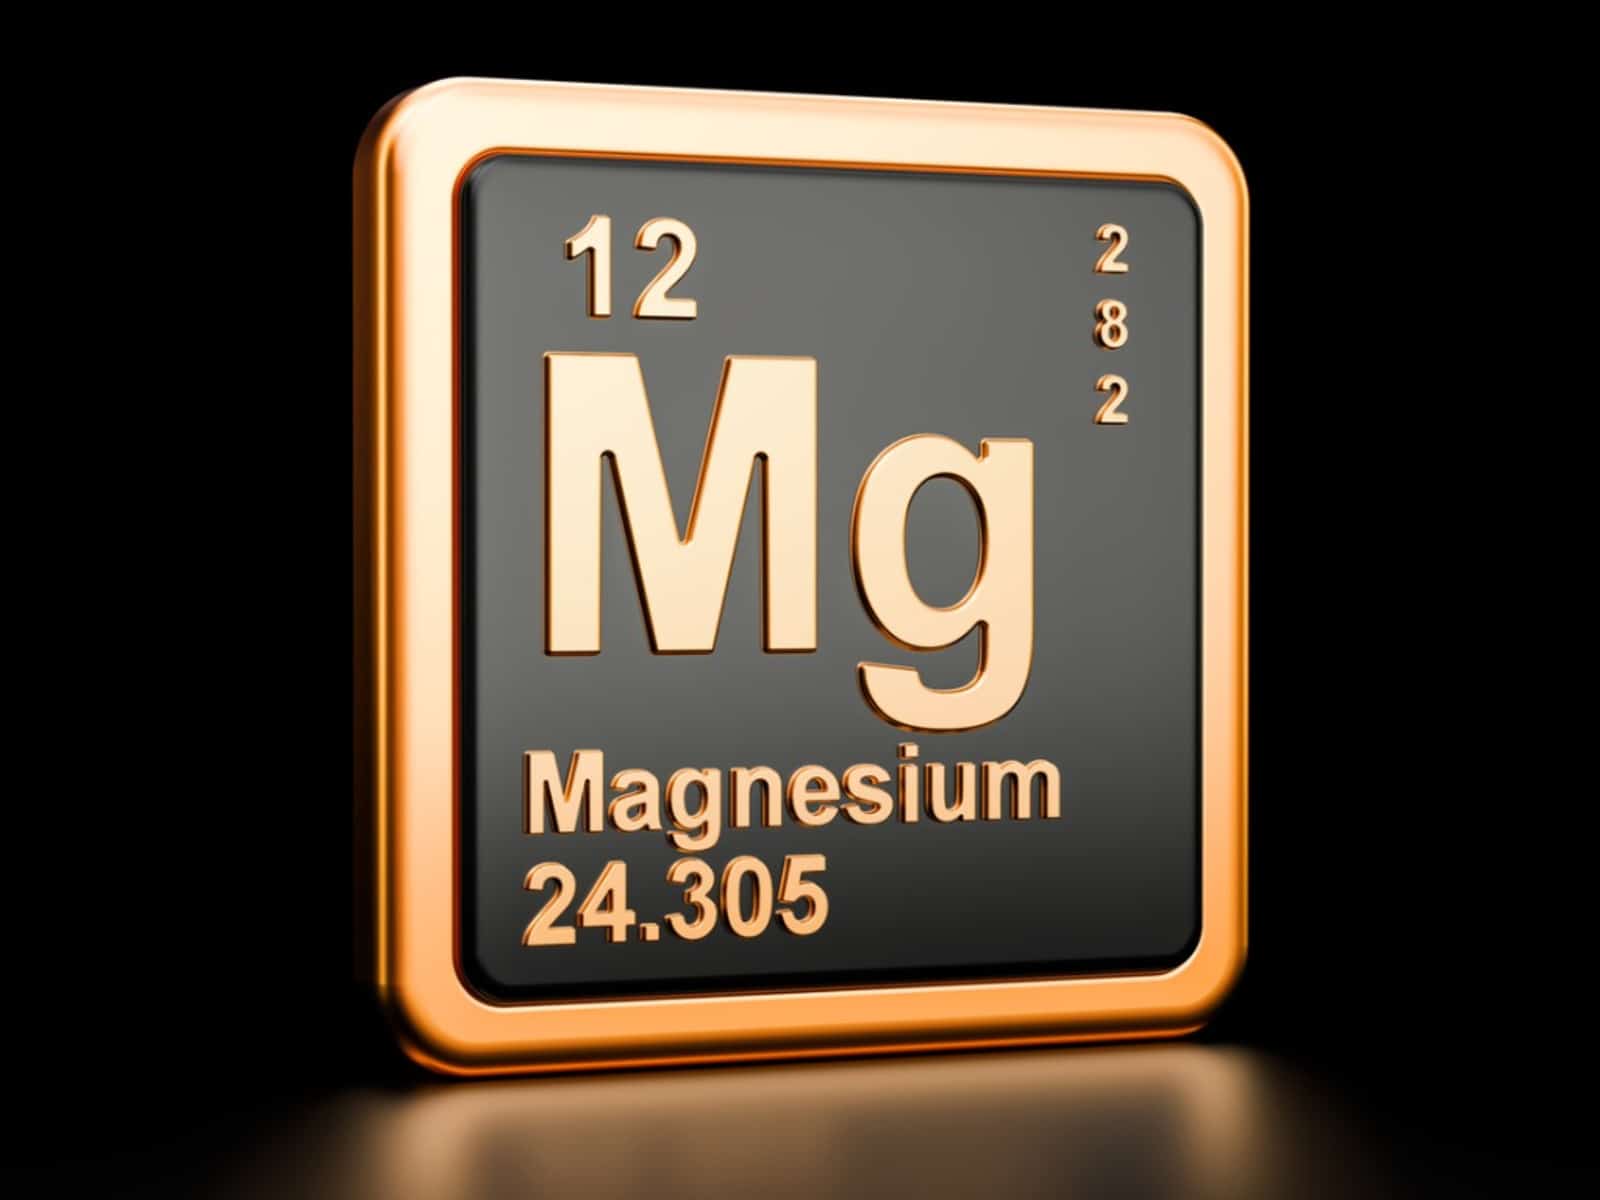 Scientists discovered magnesium in the elemental zero-oxidation state